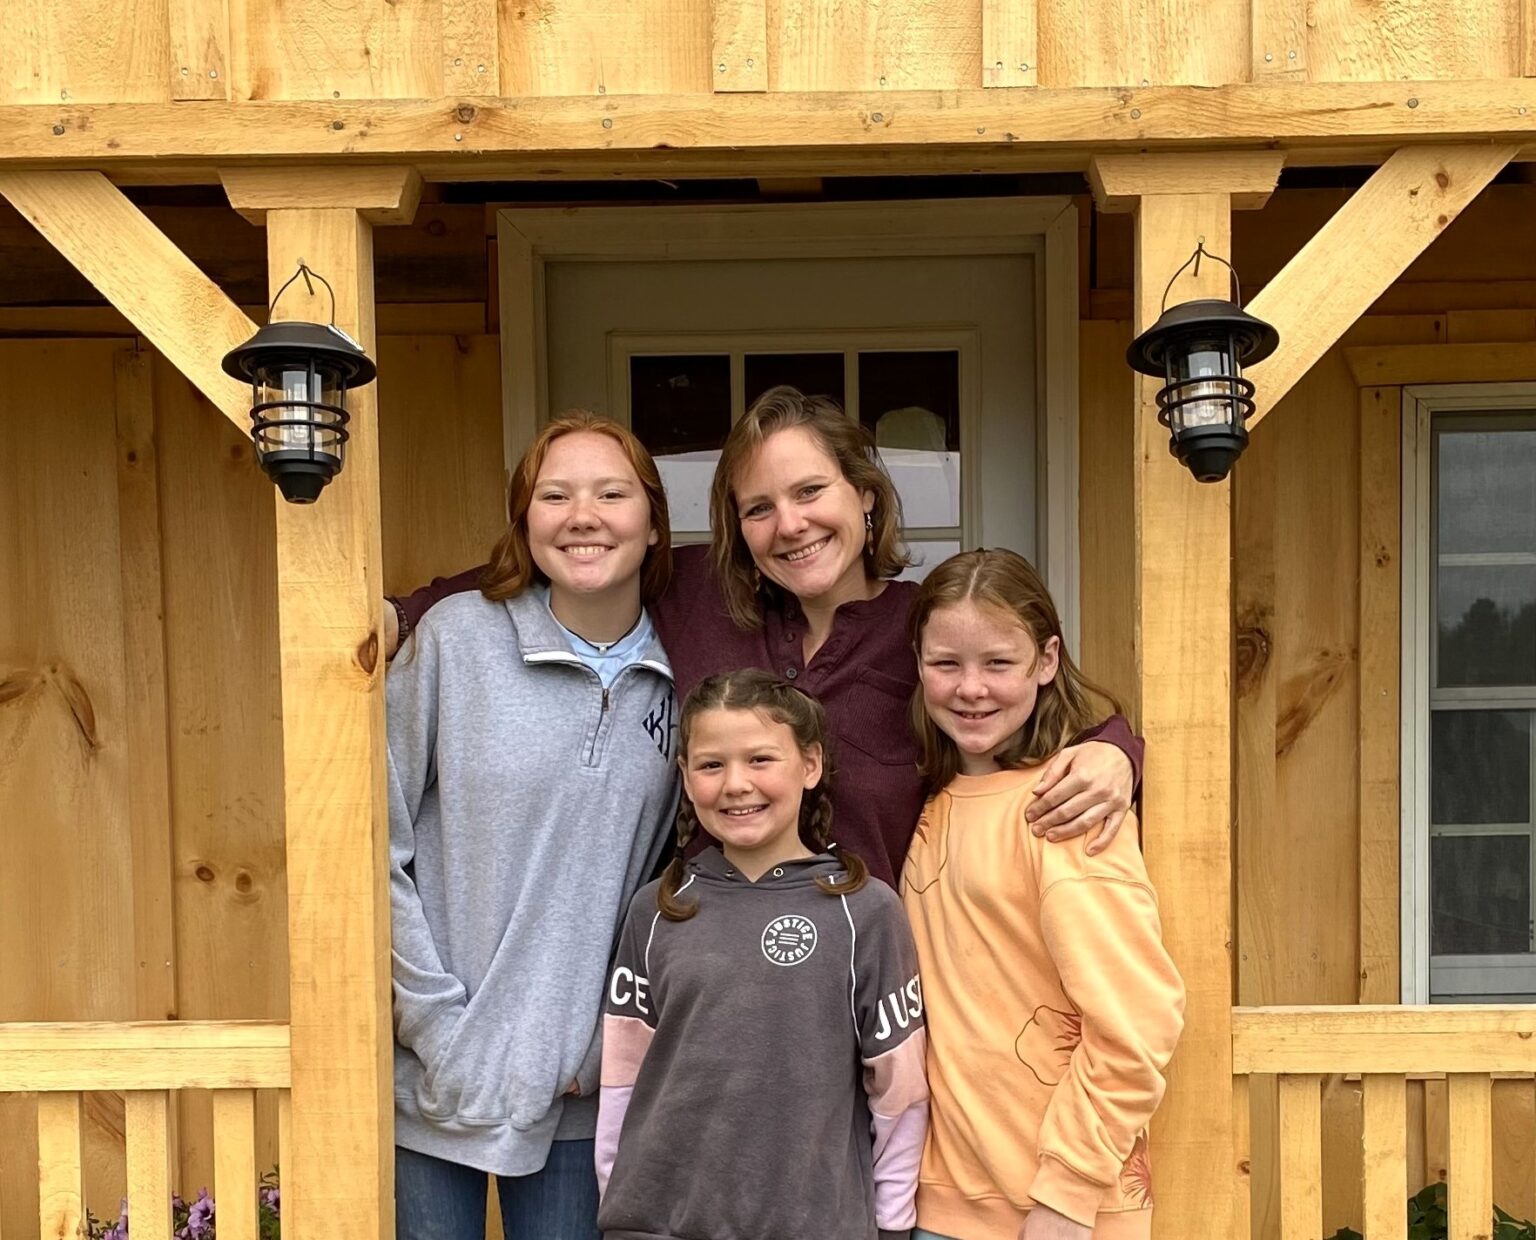 Ashley, a single mum of four, left her 9-to-5 job to live off-grid in upstate New York. Embracing nature, she built a homestead and grows her own food while homeschooling her kids.